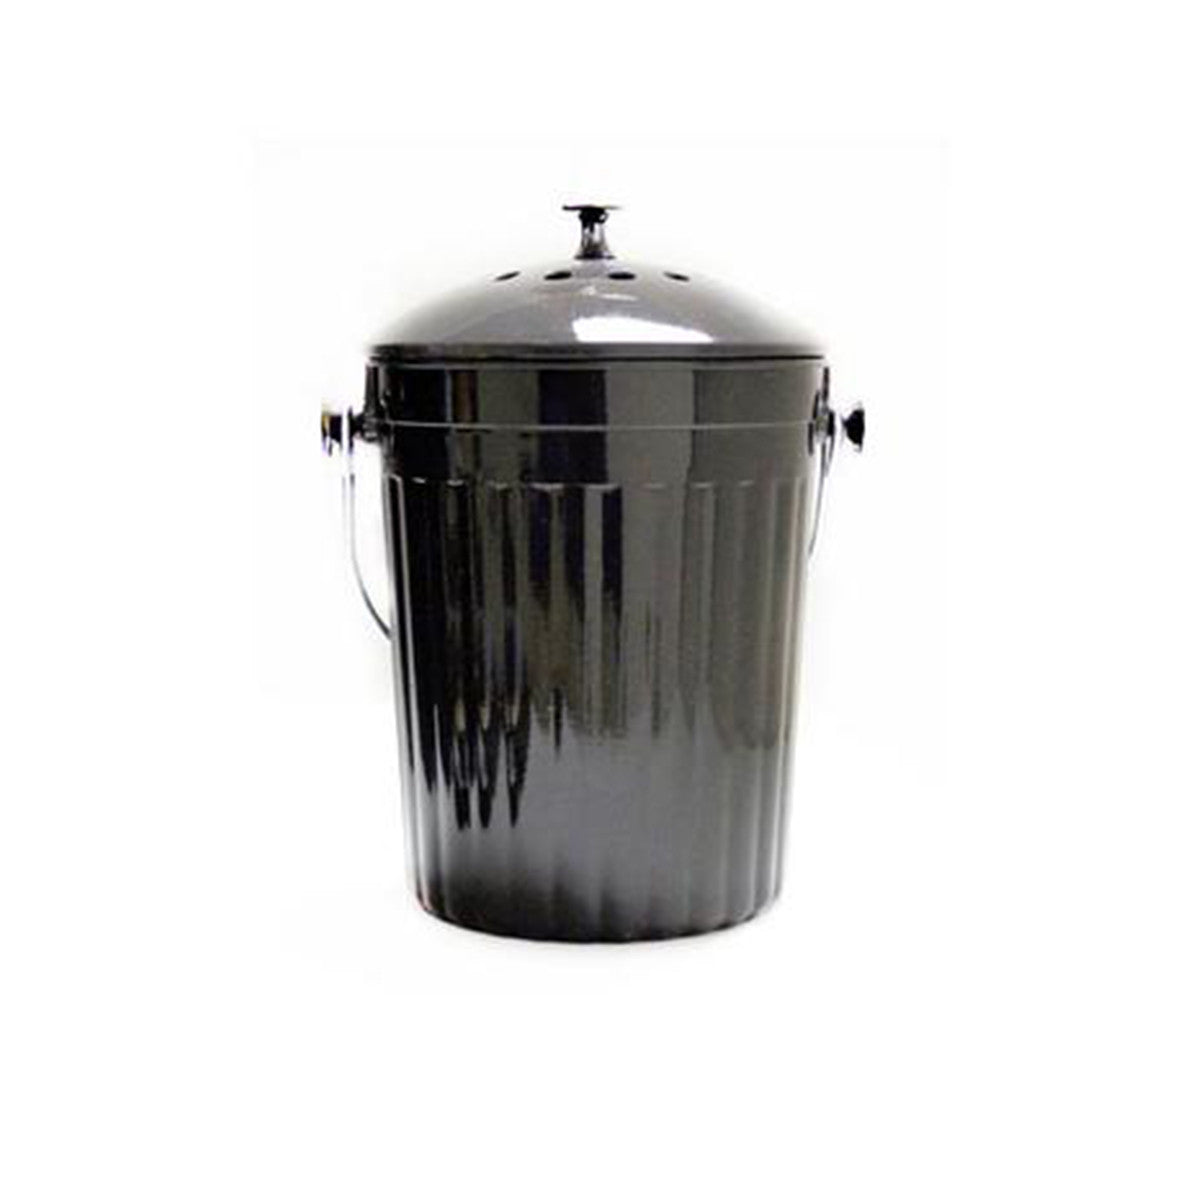 AOSION Kitchen Compost Bin Counter,1.0 Gallon Indoor Compost Bin with Lid,Compost Bucket Countertop Composter Container with 3pcs Charcoal Filters